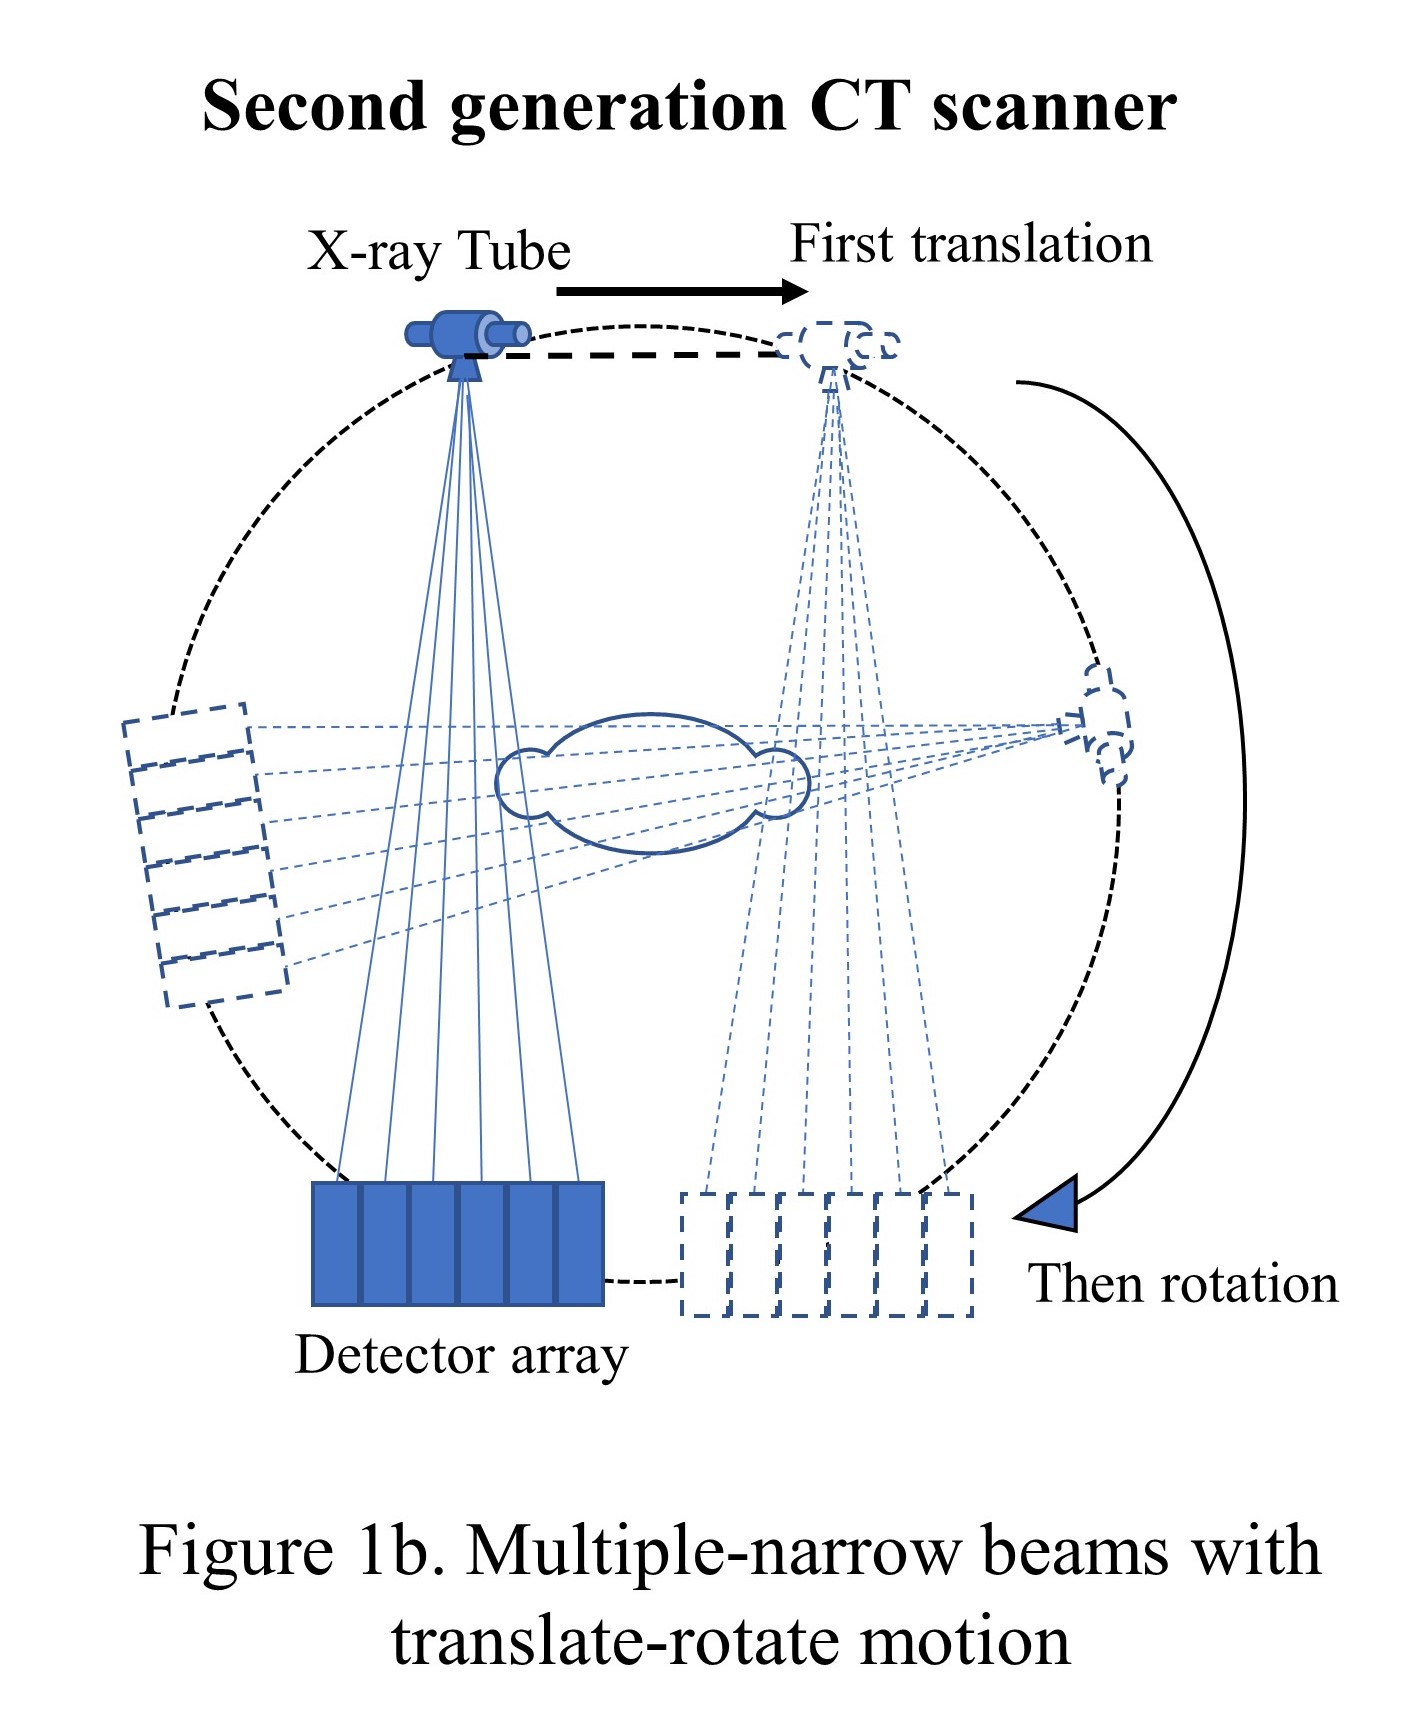 Multiple-narrow beams with translate-rotate motion